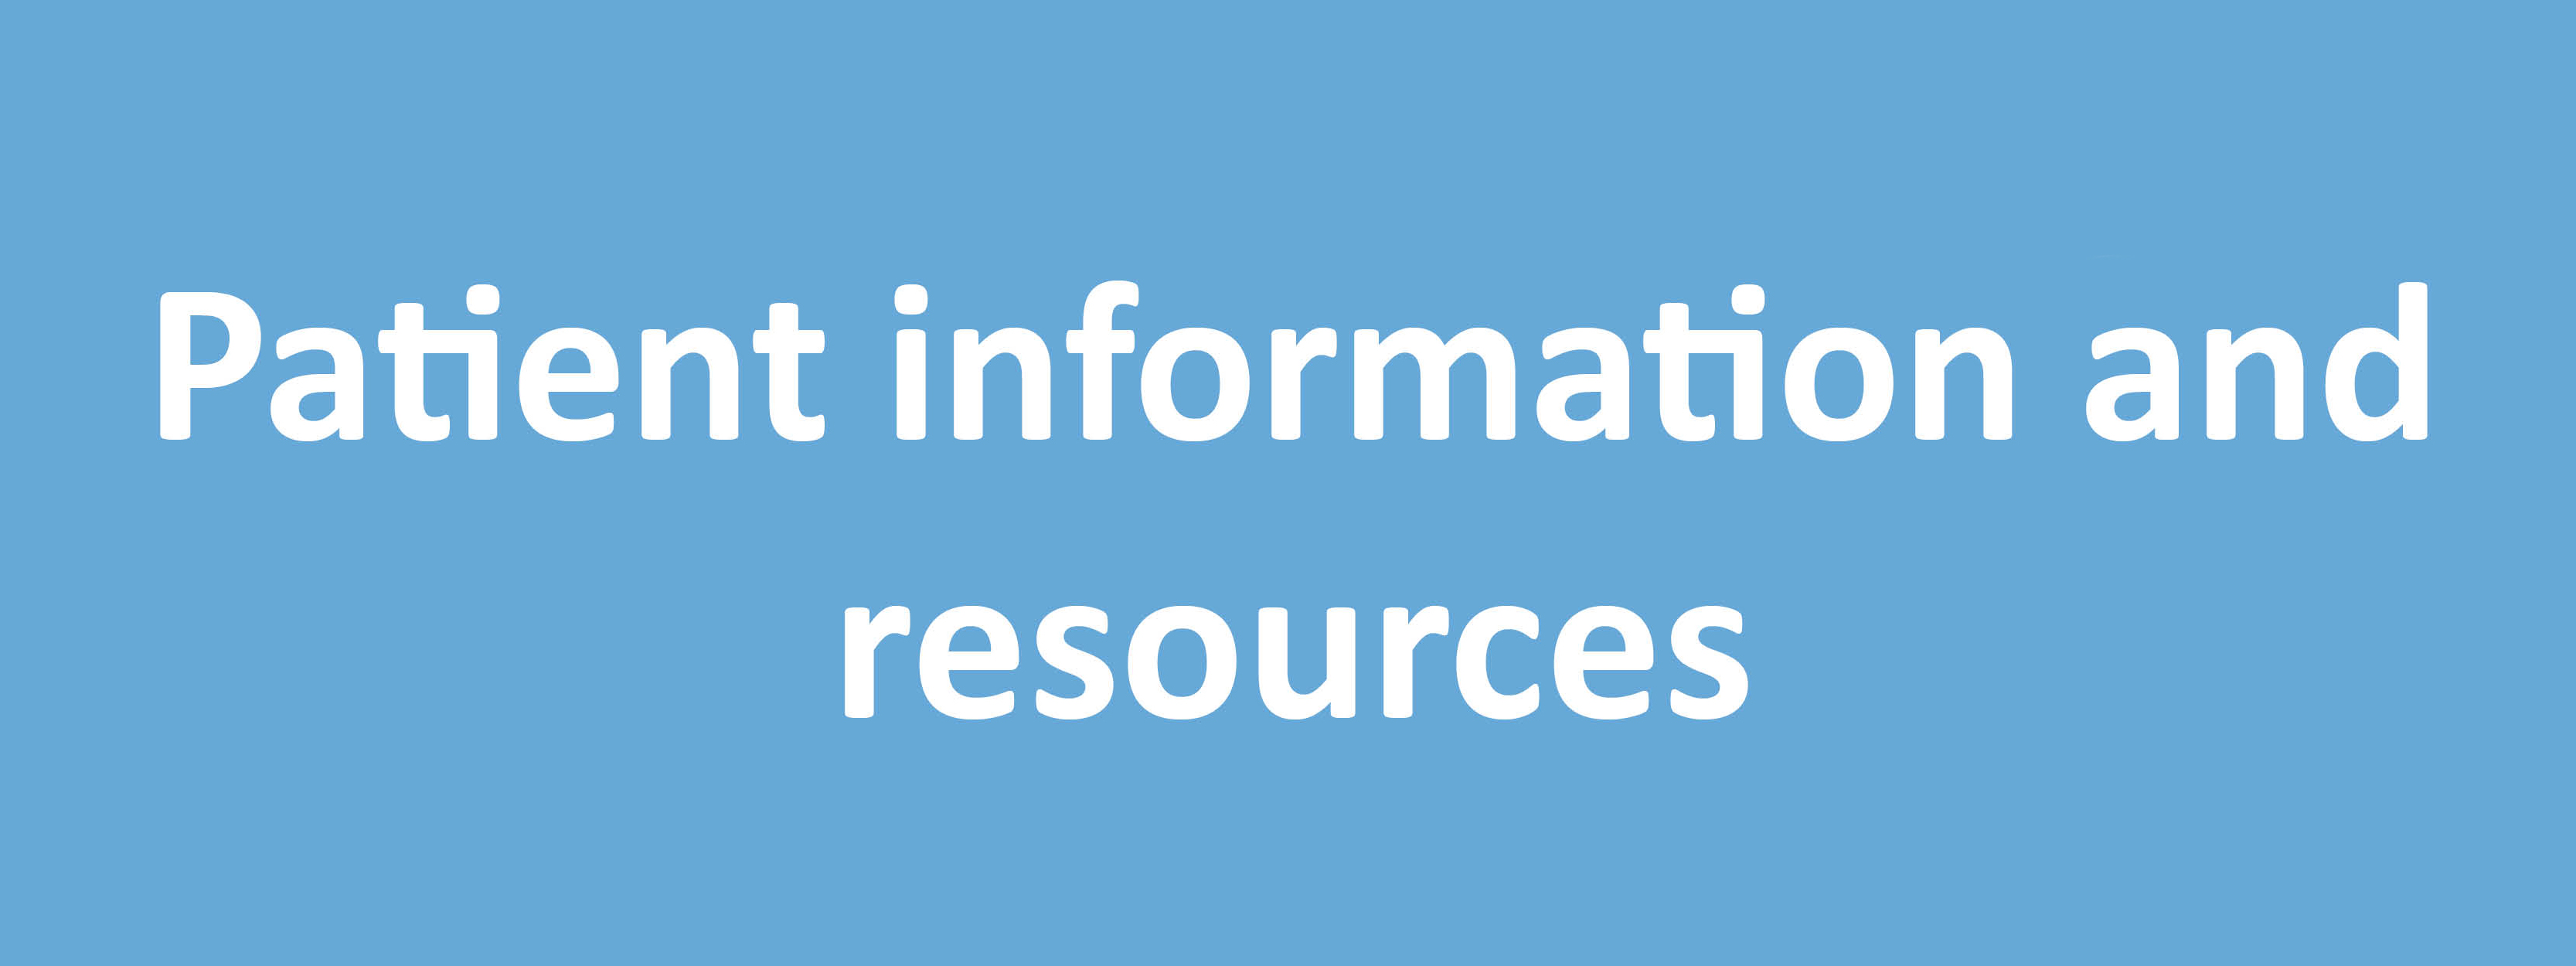 Patient information and resources st margaret's hospice care